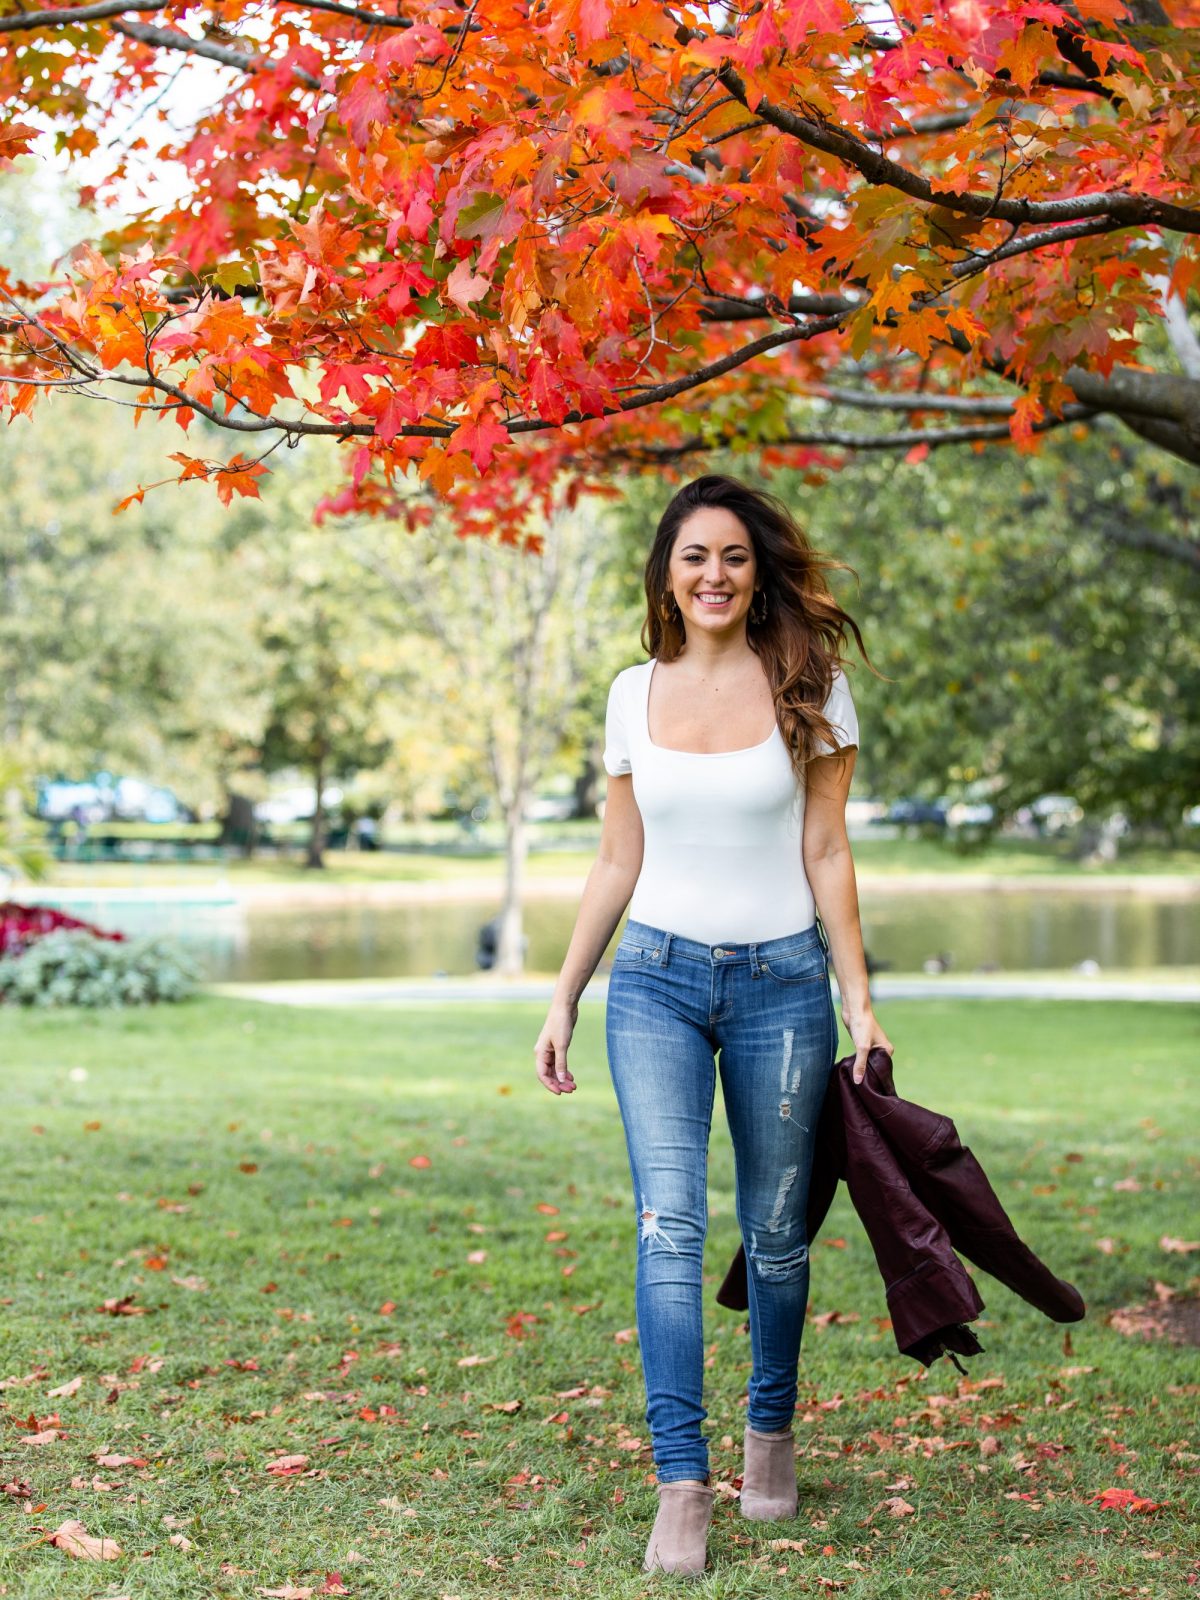 boston public garden, fall outfit ideas, what to wear in the fall, wine leather moto jacket, ripped skinny jeans, the best booties for fall, casual fall outfits